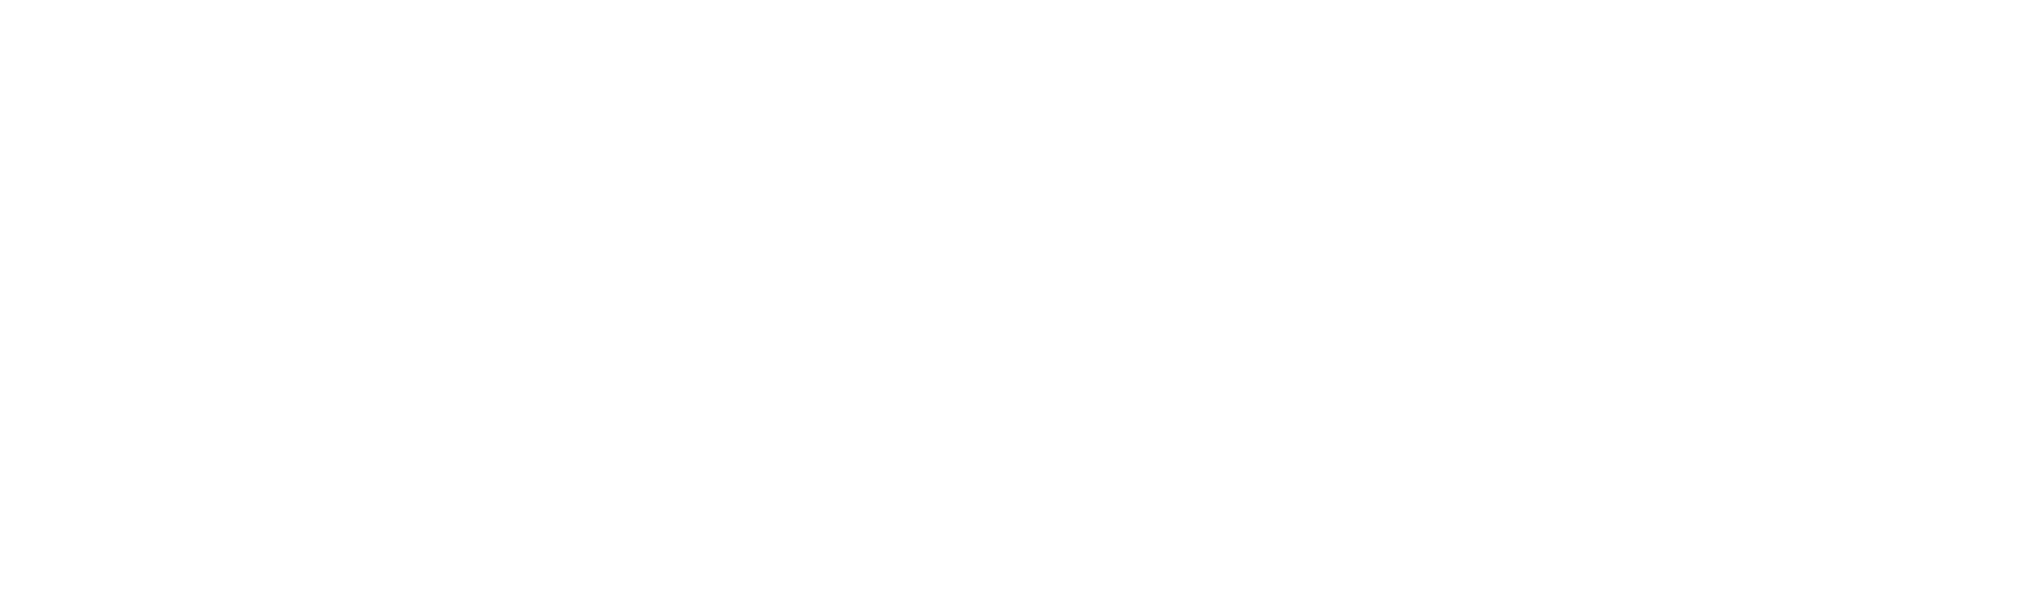 American Family Survival